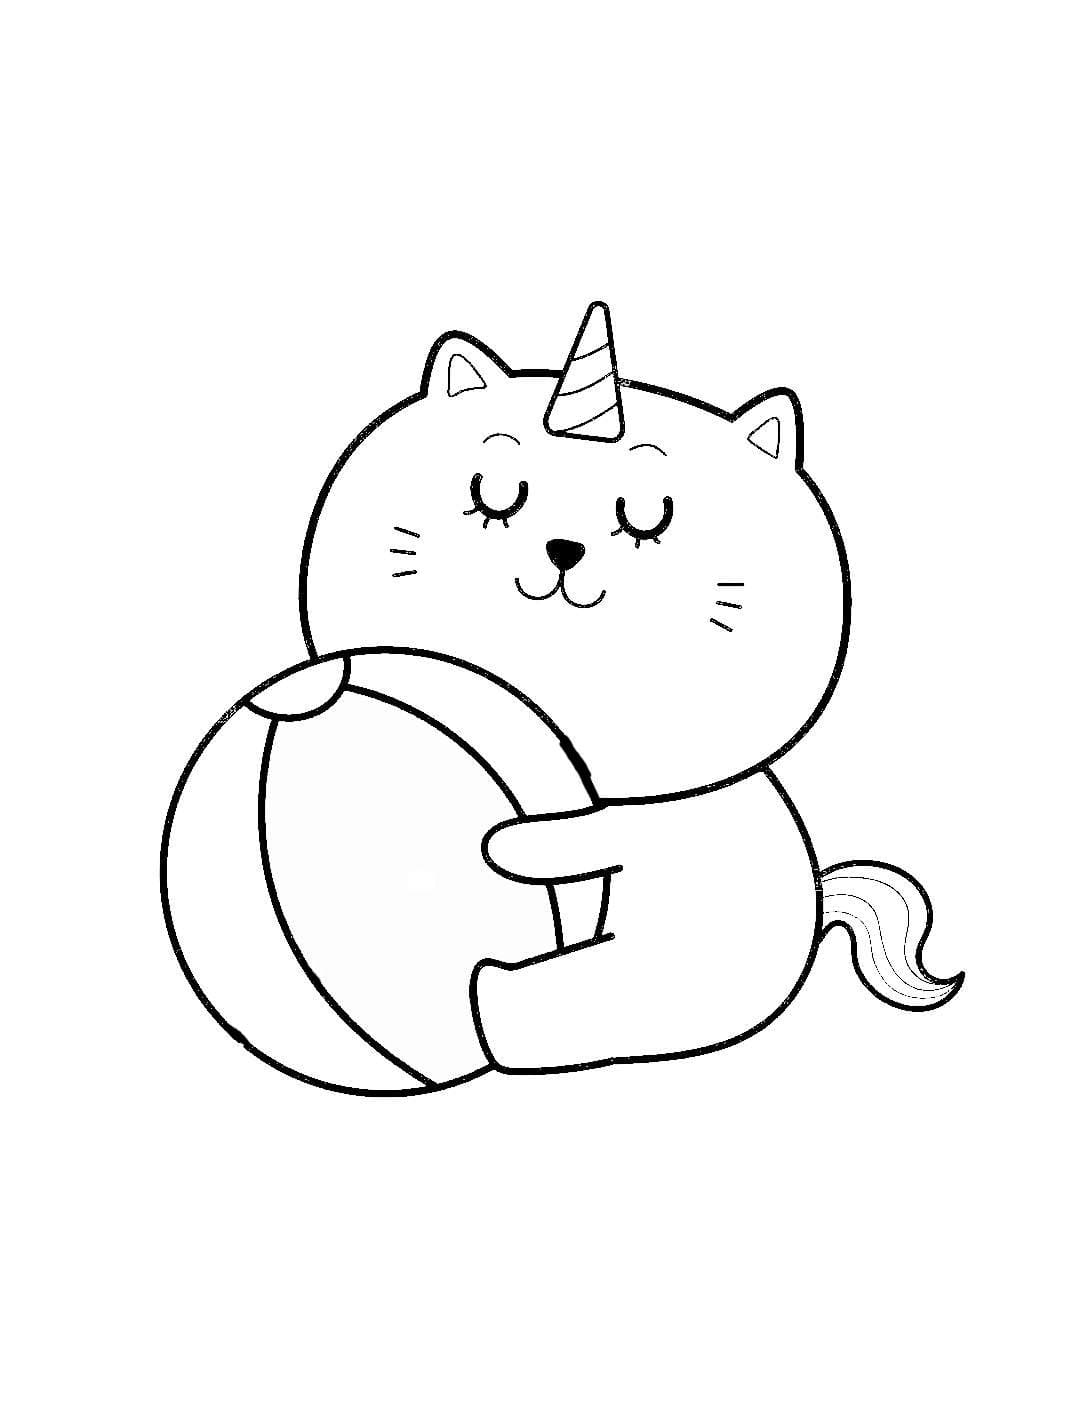 Coloring page Unicorn Cat for children